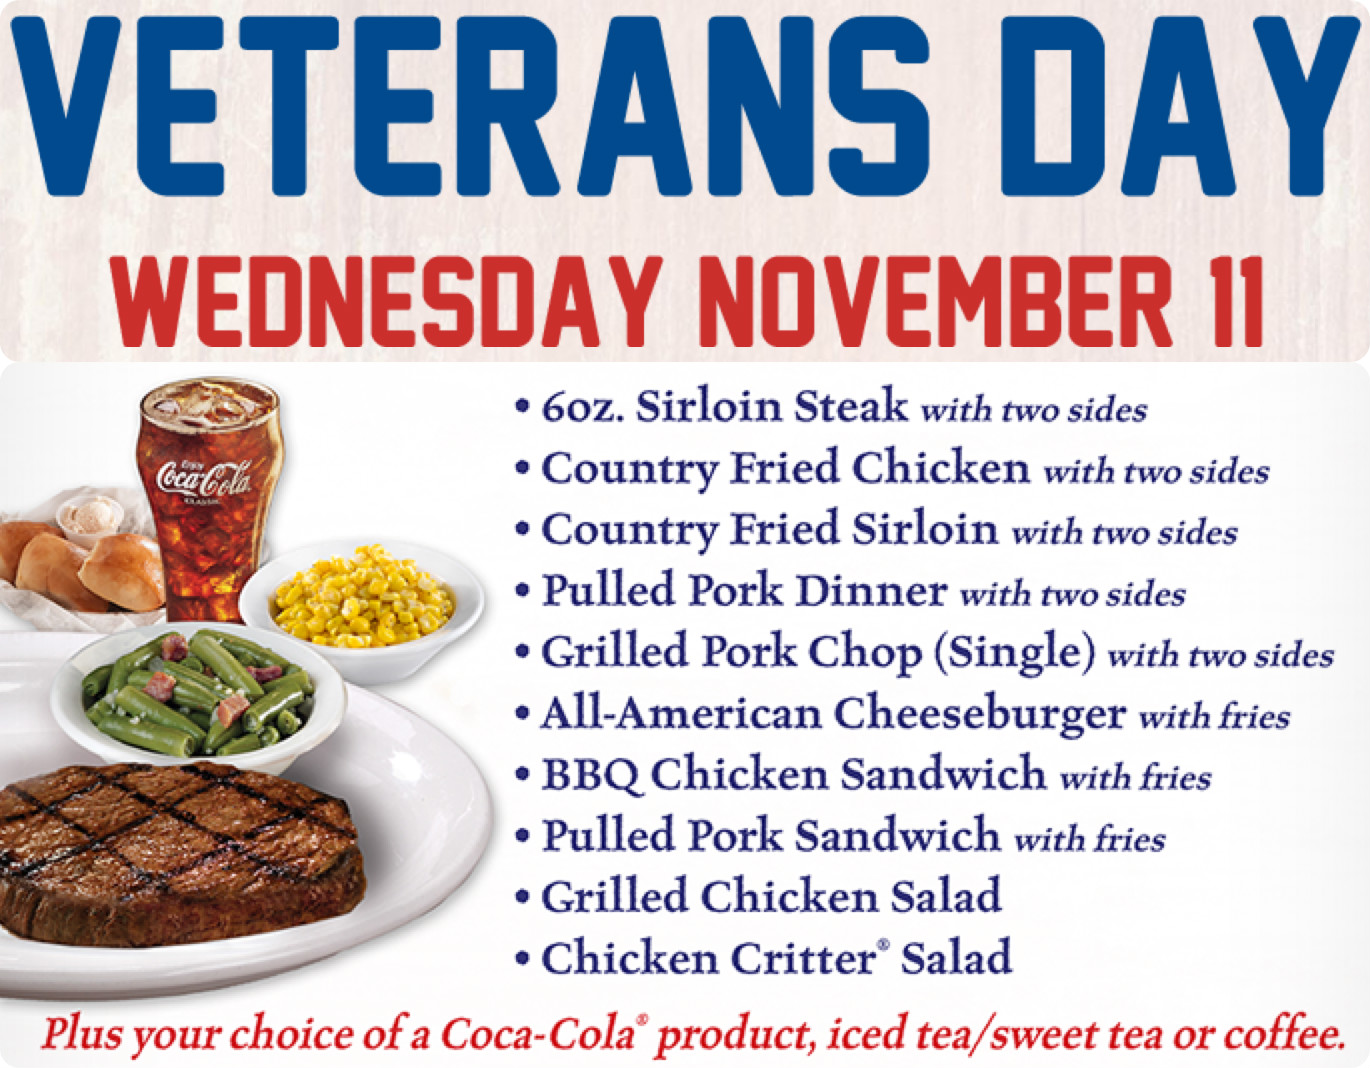 texas-roadhouse-free-lunch-for-veterans-active-duty-military-on